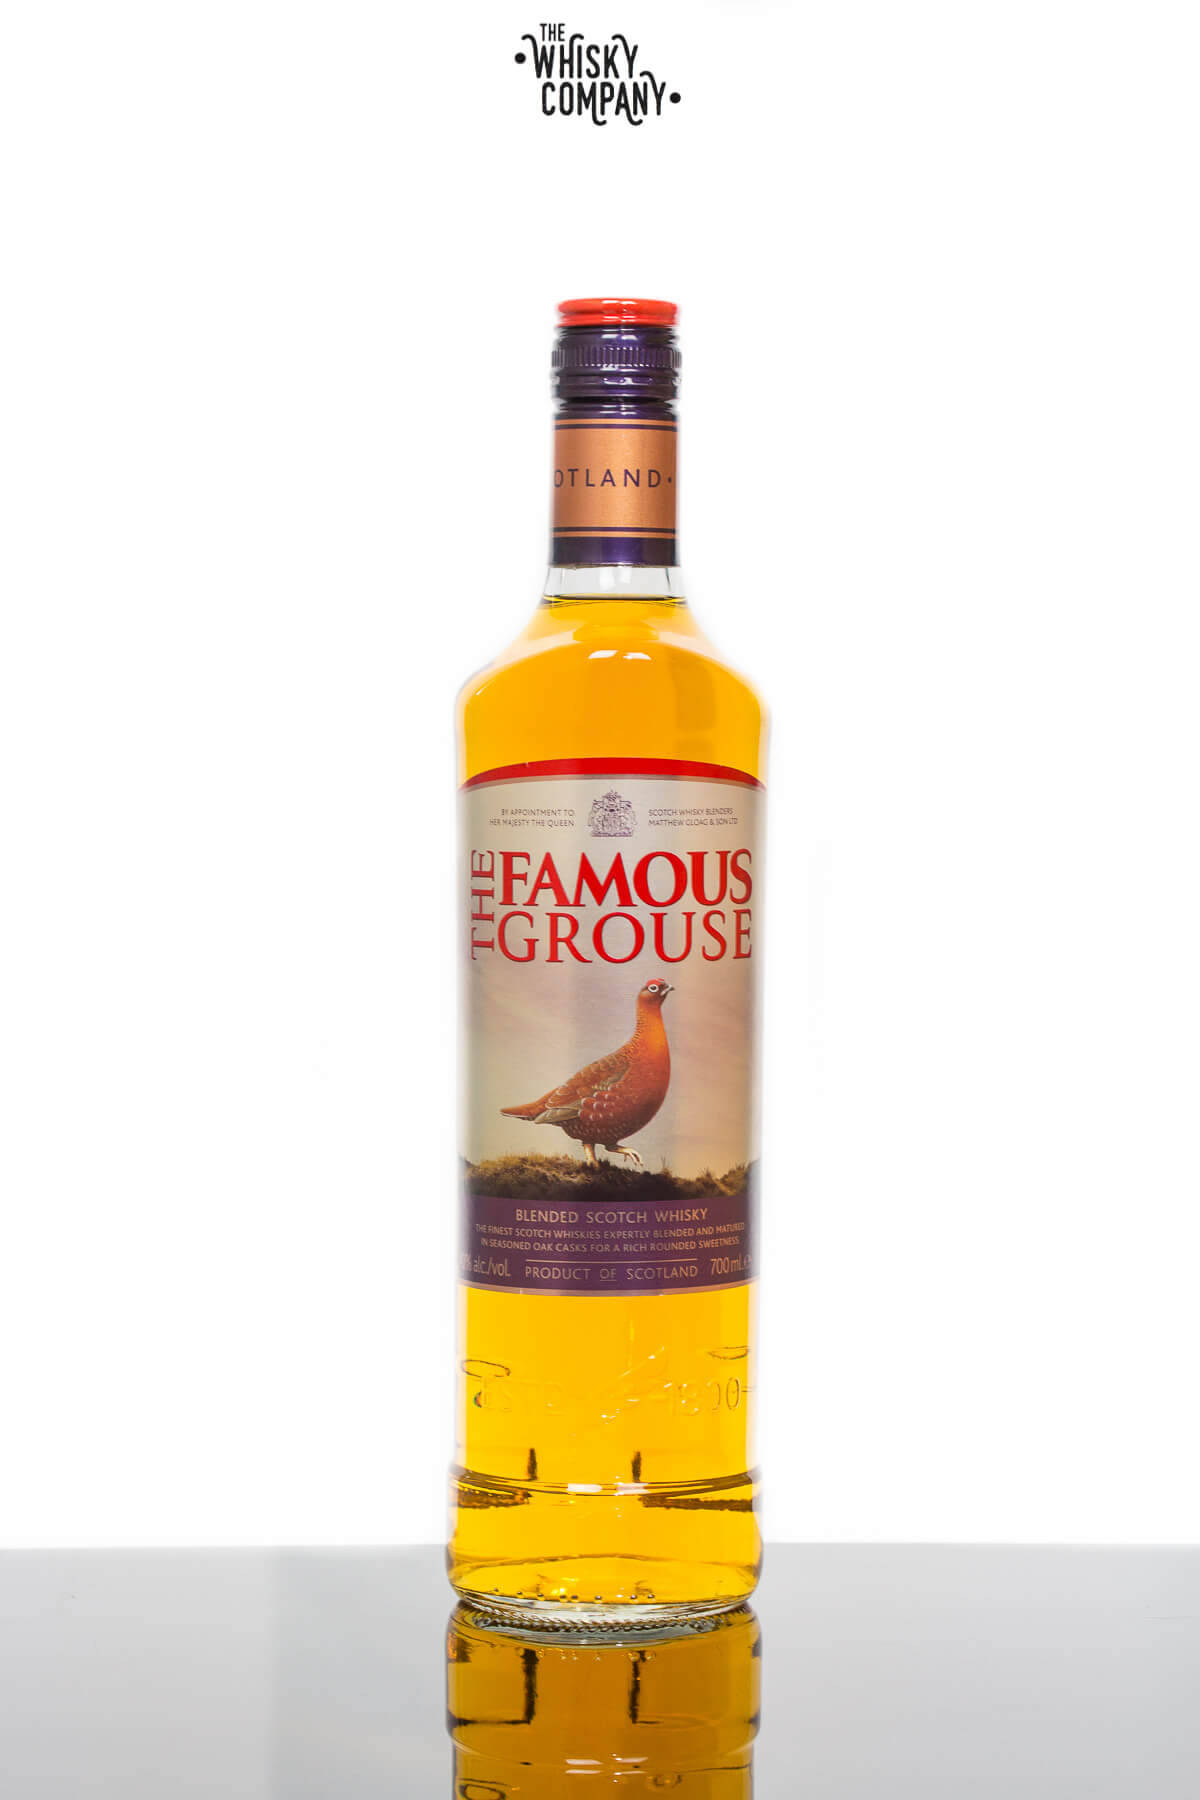 Famous Grouse Whisky Company Poster Wallpaper